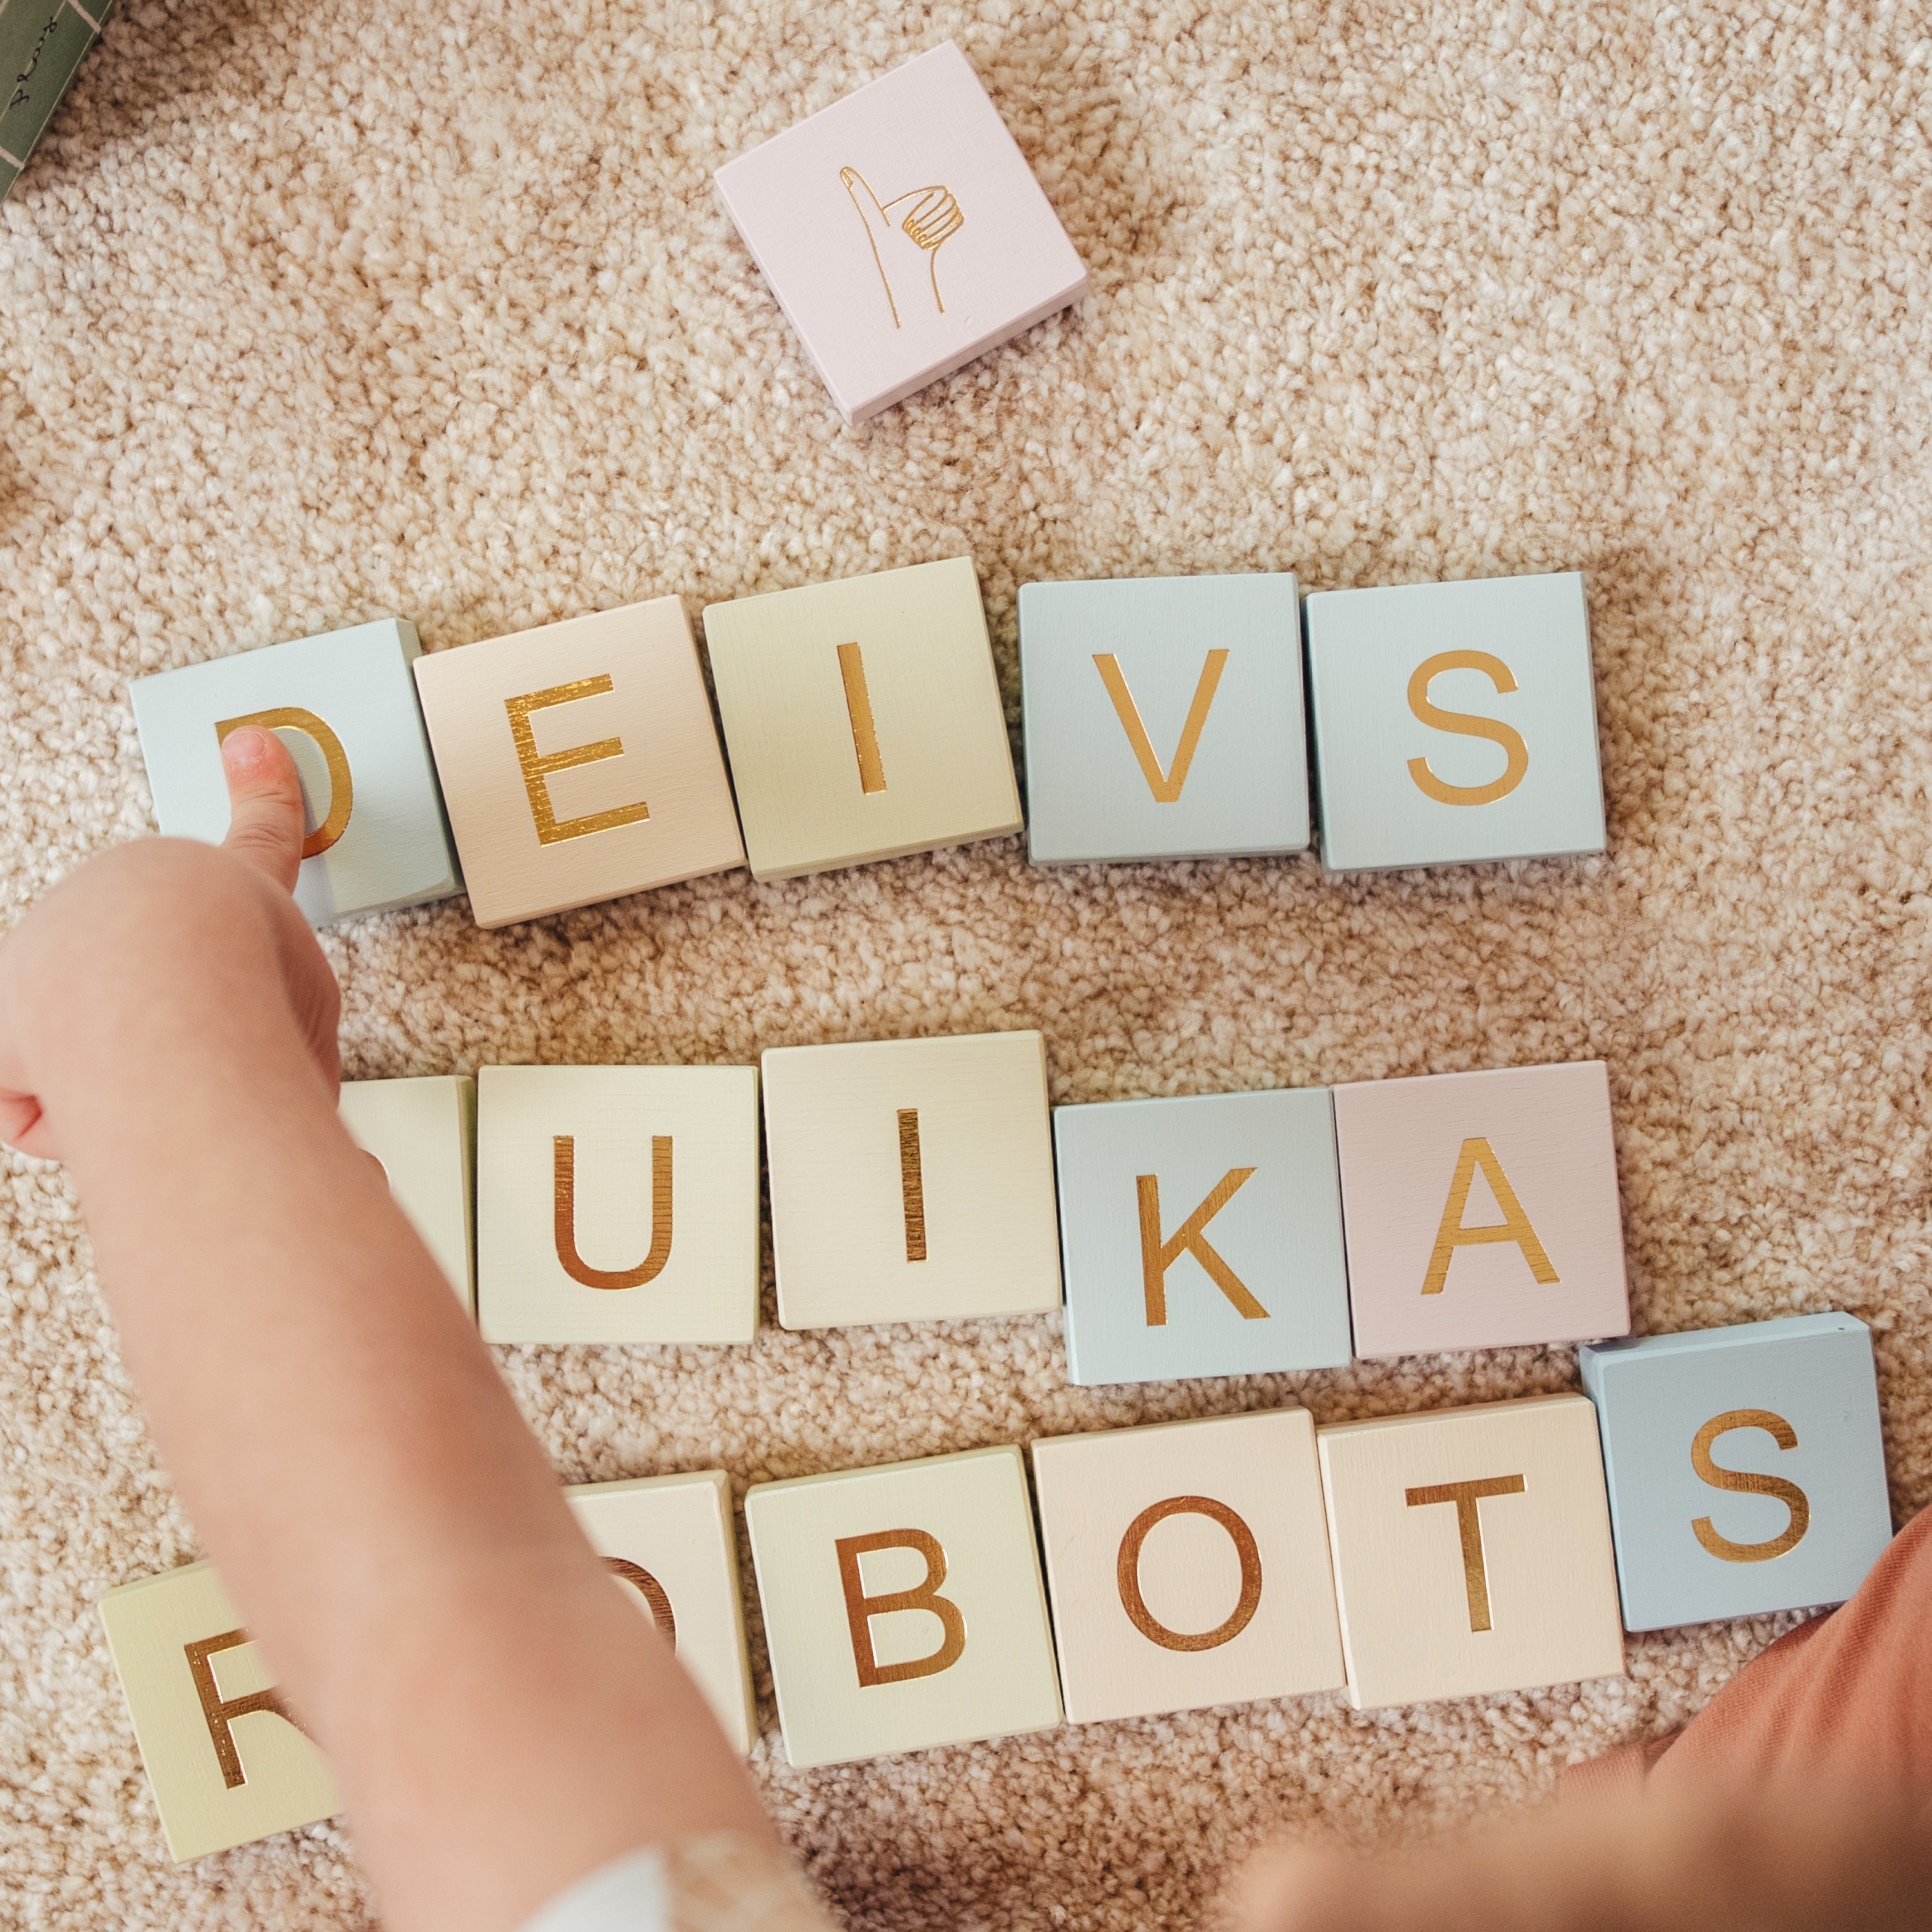 WOODEN BLOCKS WITH LETTERS AND ILUSTRATIONS